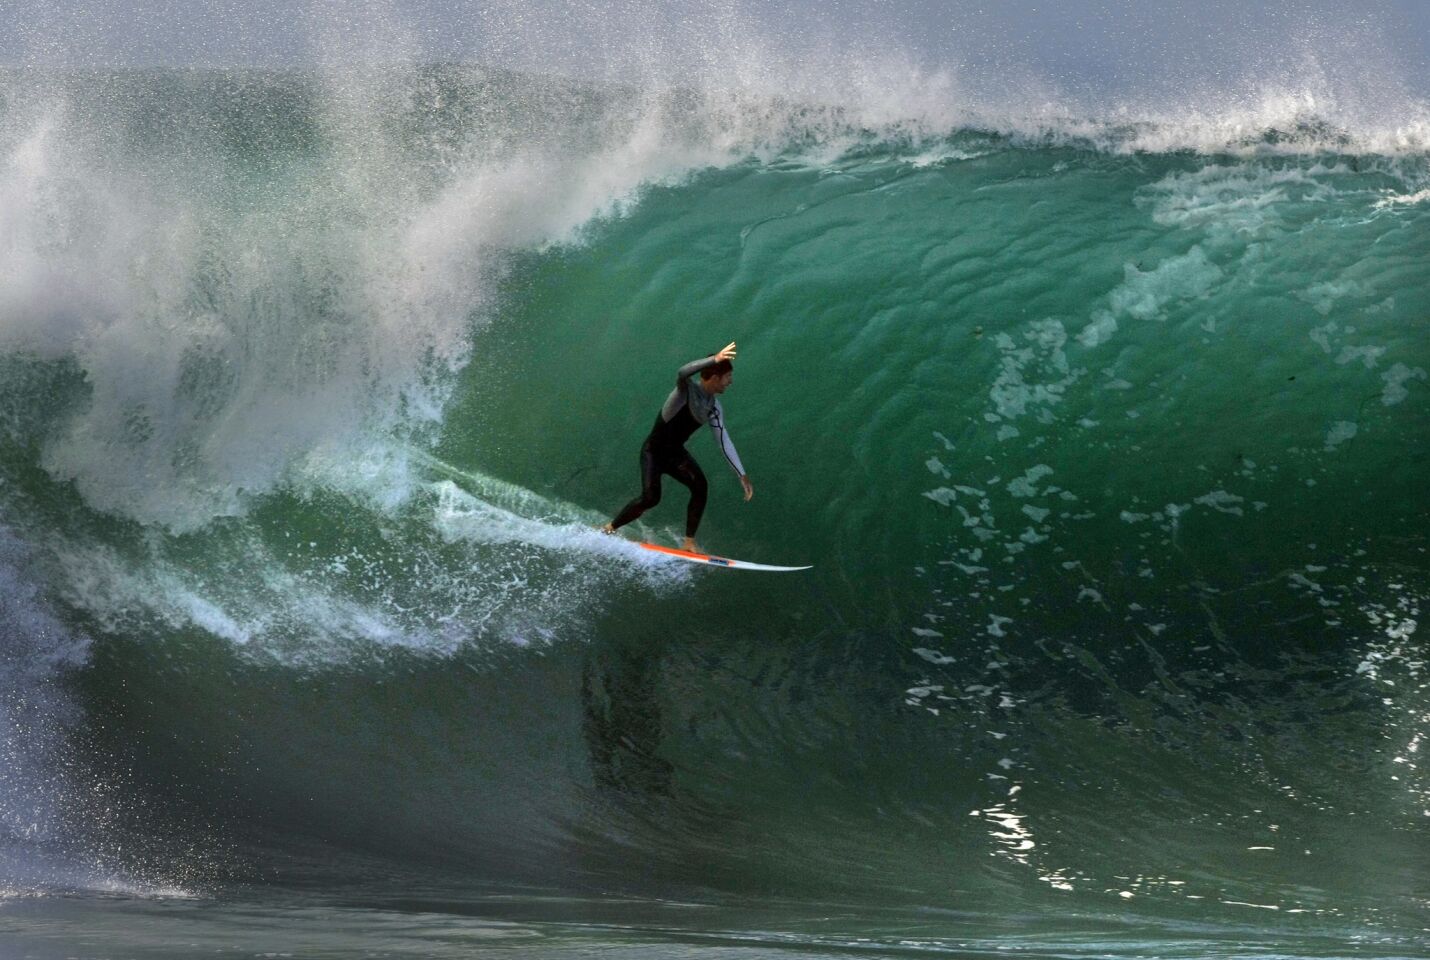 A surfer raises his arm to acknowledge a screaming crowd at the Wedge in Newport Beach. Thousands of spectators lined the beach Wednesday to watch waves as high as 25 feet tall generated by Hurricane Marie off the Pacific coast.